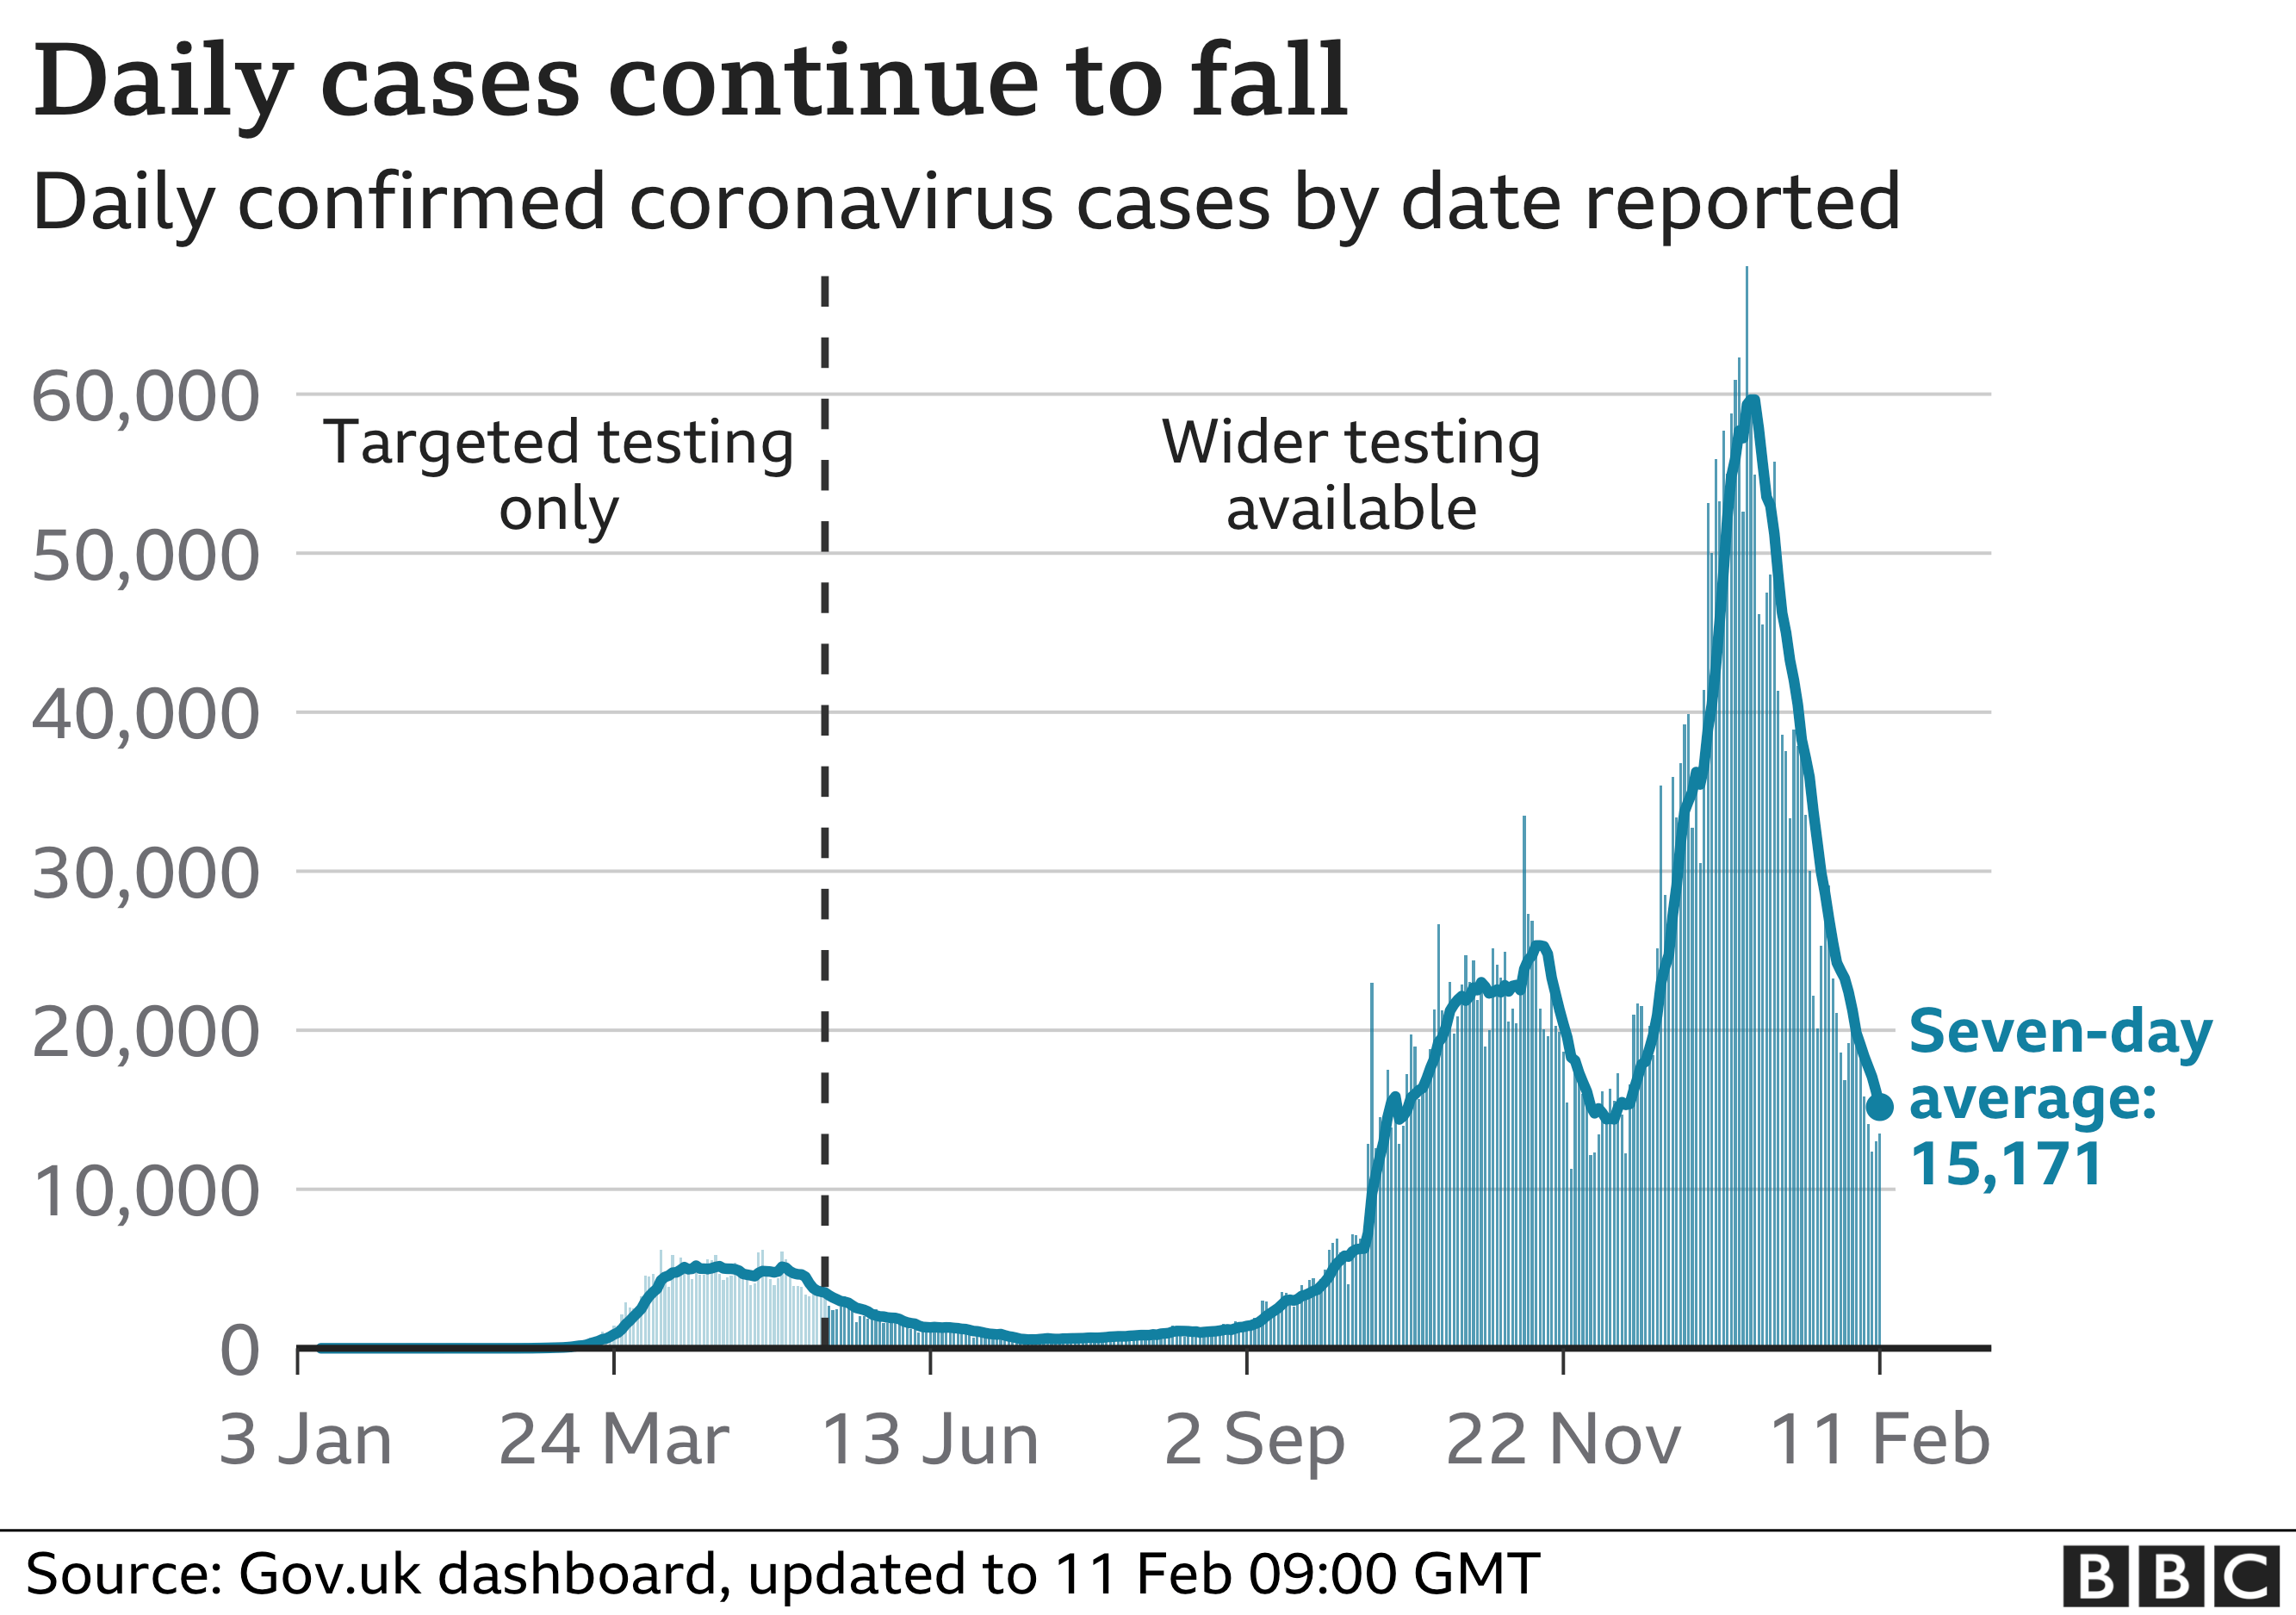 Chart showing daily cases are continuing to fall